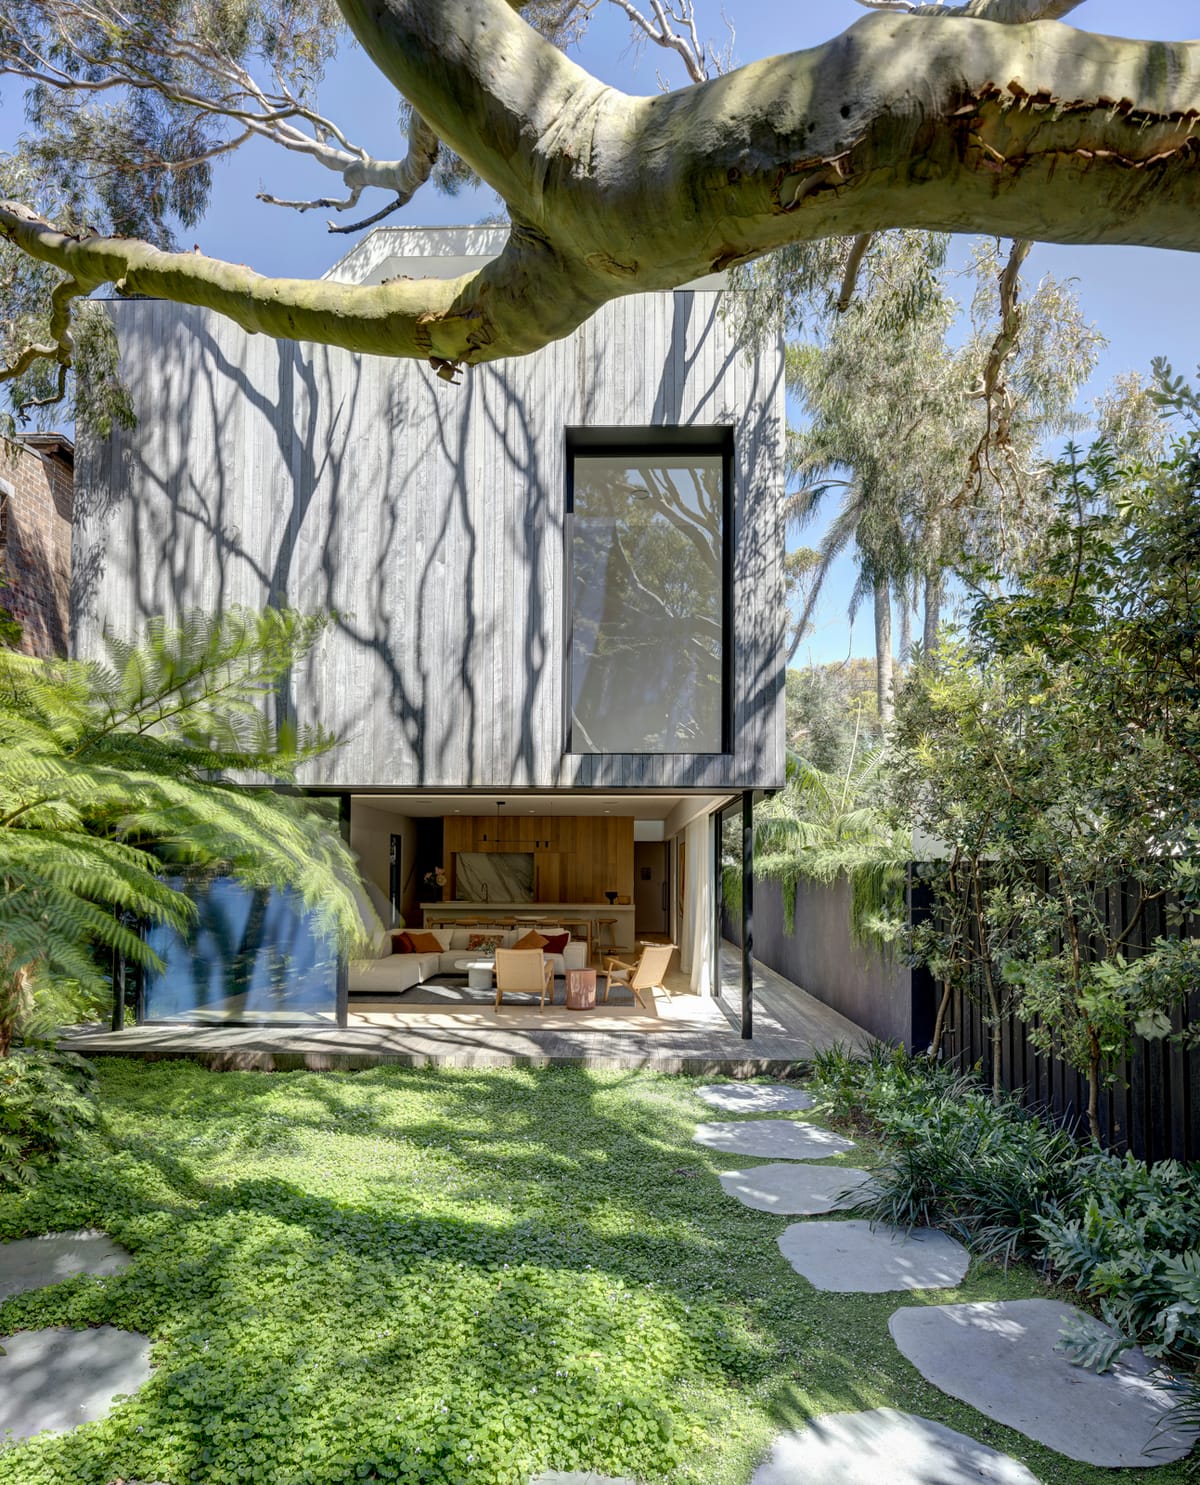 Quarry Box by MCK Architects. Photography by Brett Boardman. Exterior facade of double story home with lush backyard.